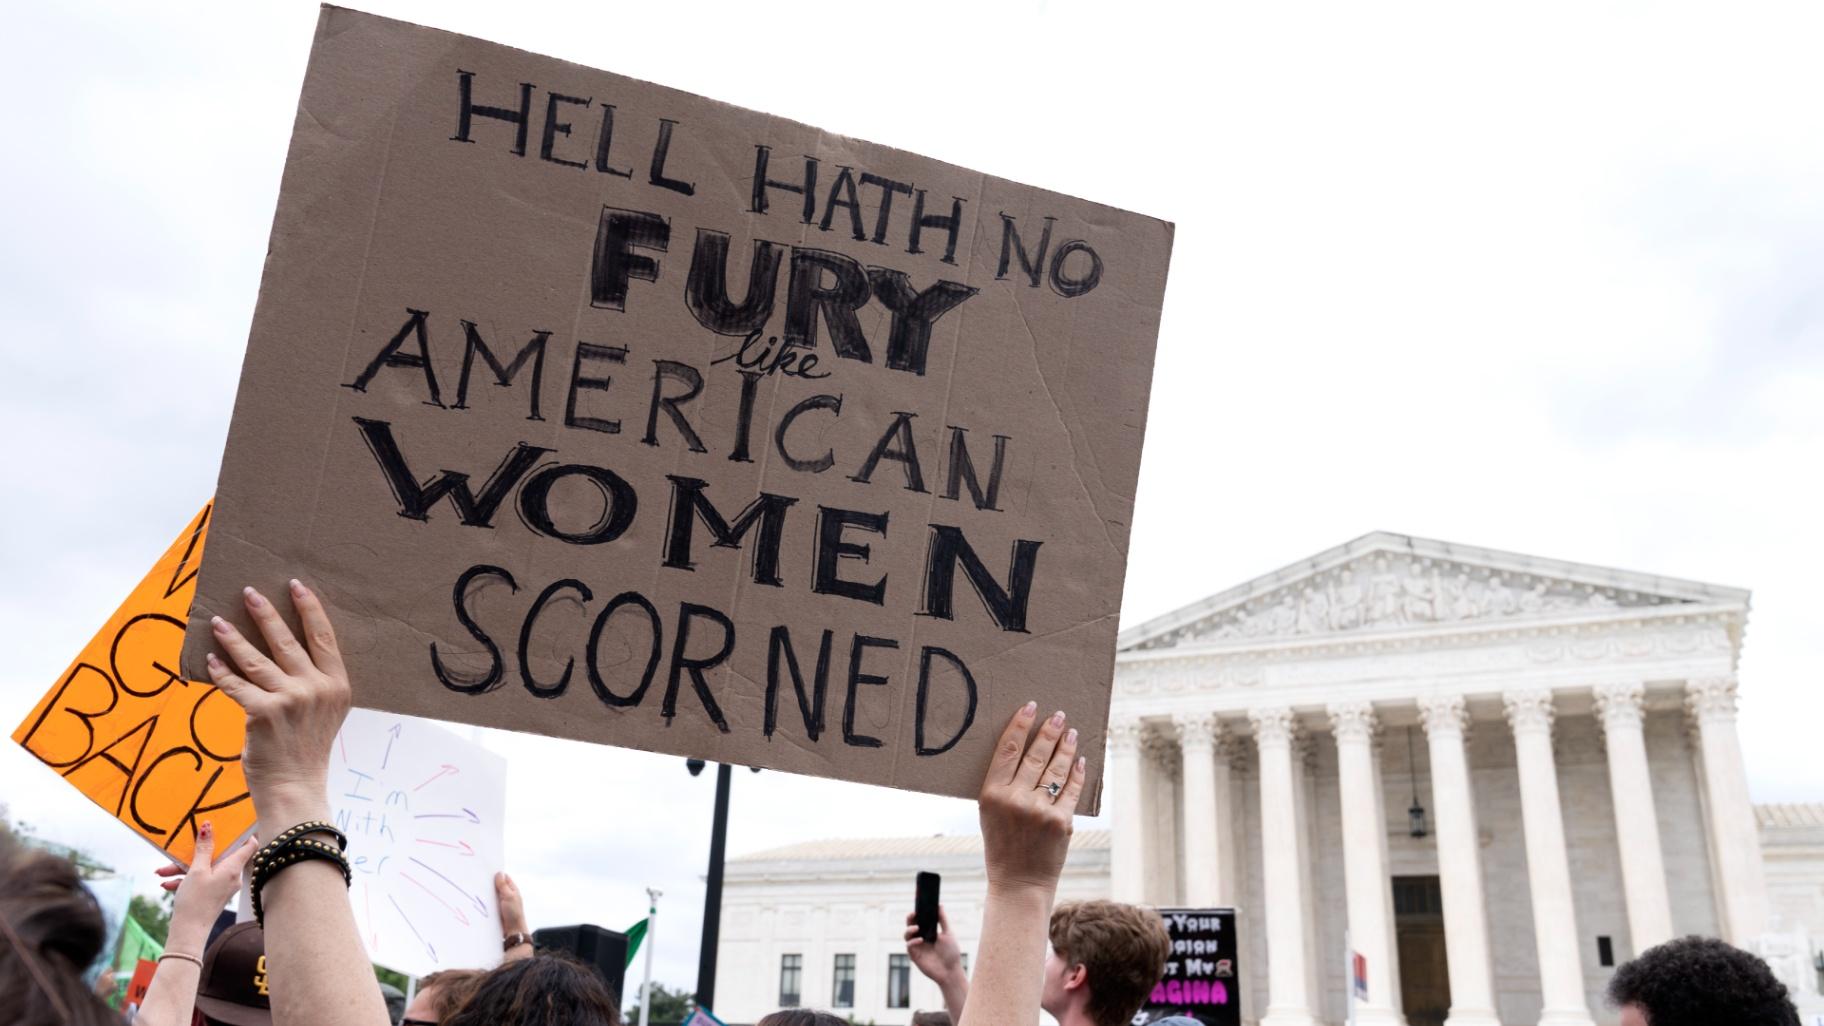 People protest following the Supreme Court’s decision to overturn Roe v. Wade in Washington, June 24, 2022. (AP Photo/Jacquelyn Martin, File)